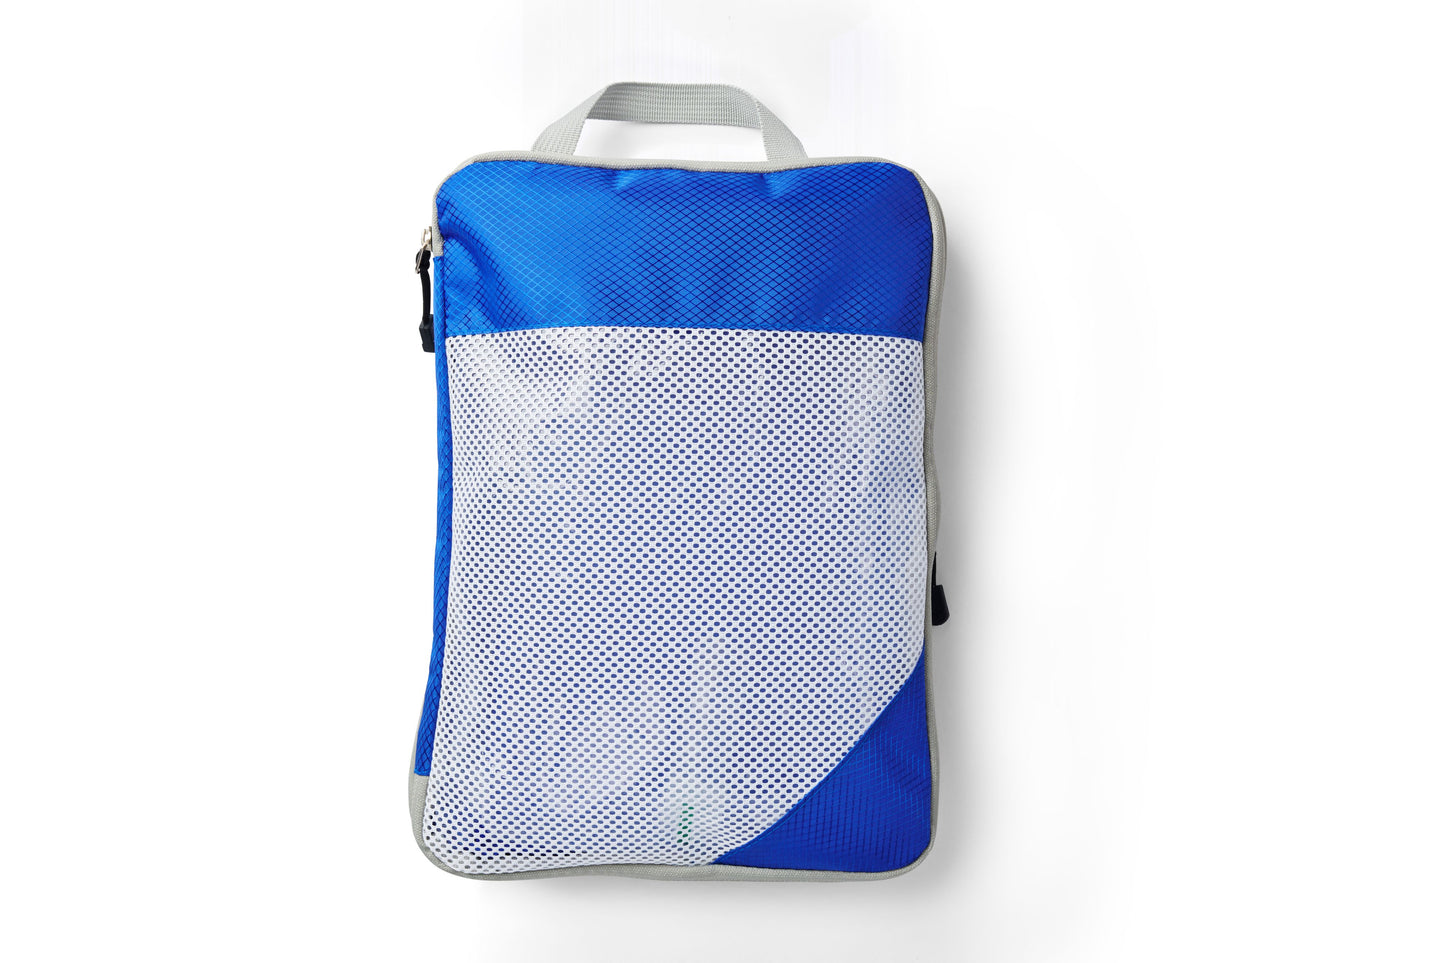 SYDNEY LUGGAGE COMPRESSION PACKING CUBES ROYAL BLUE